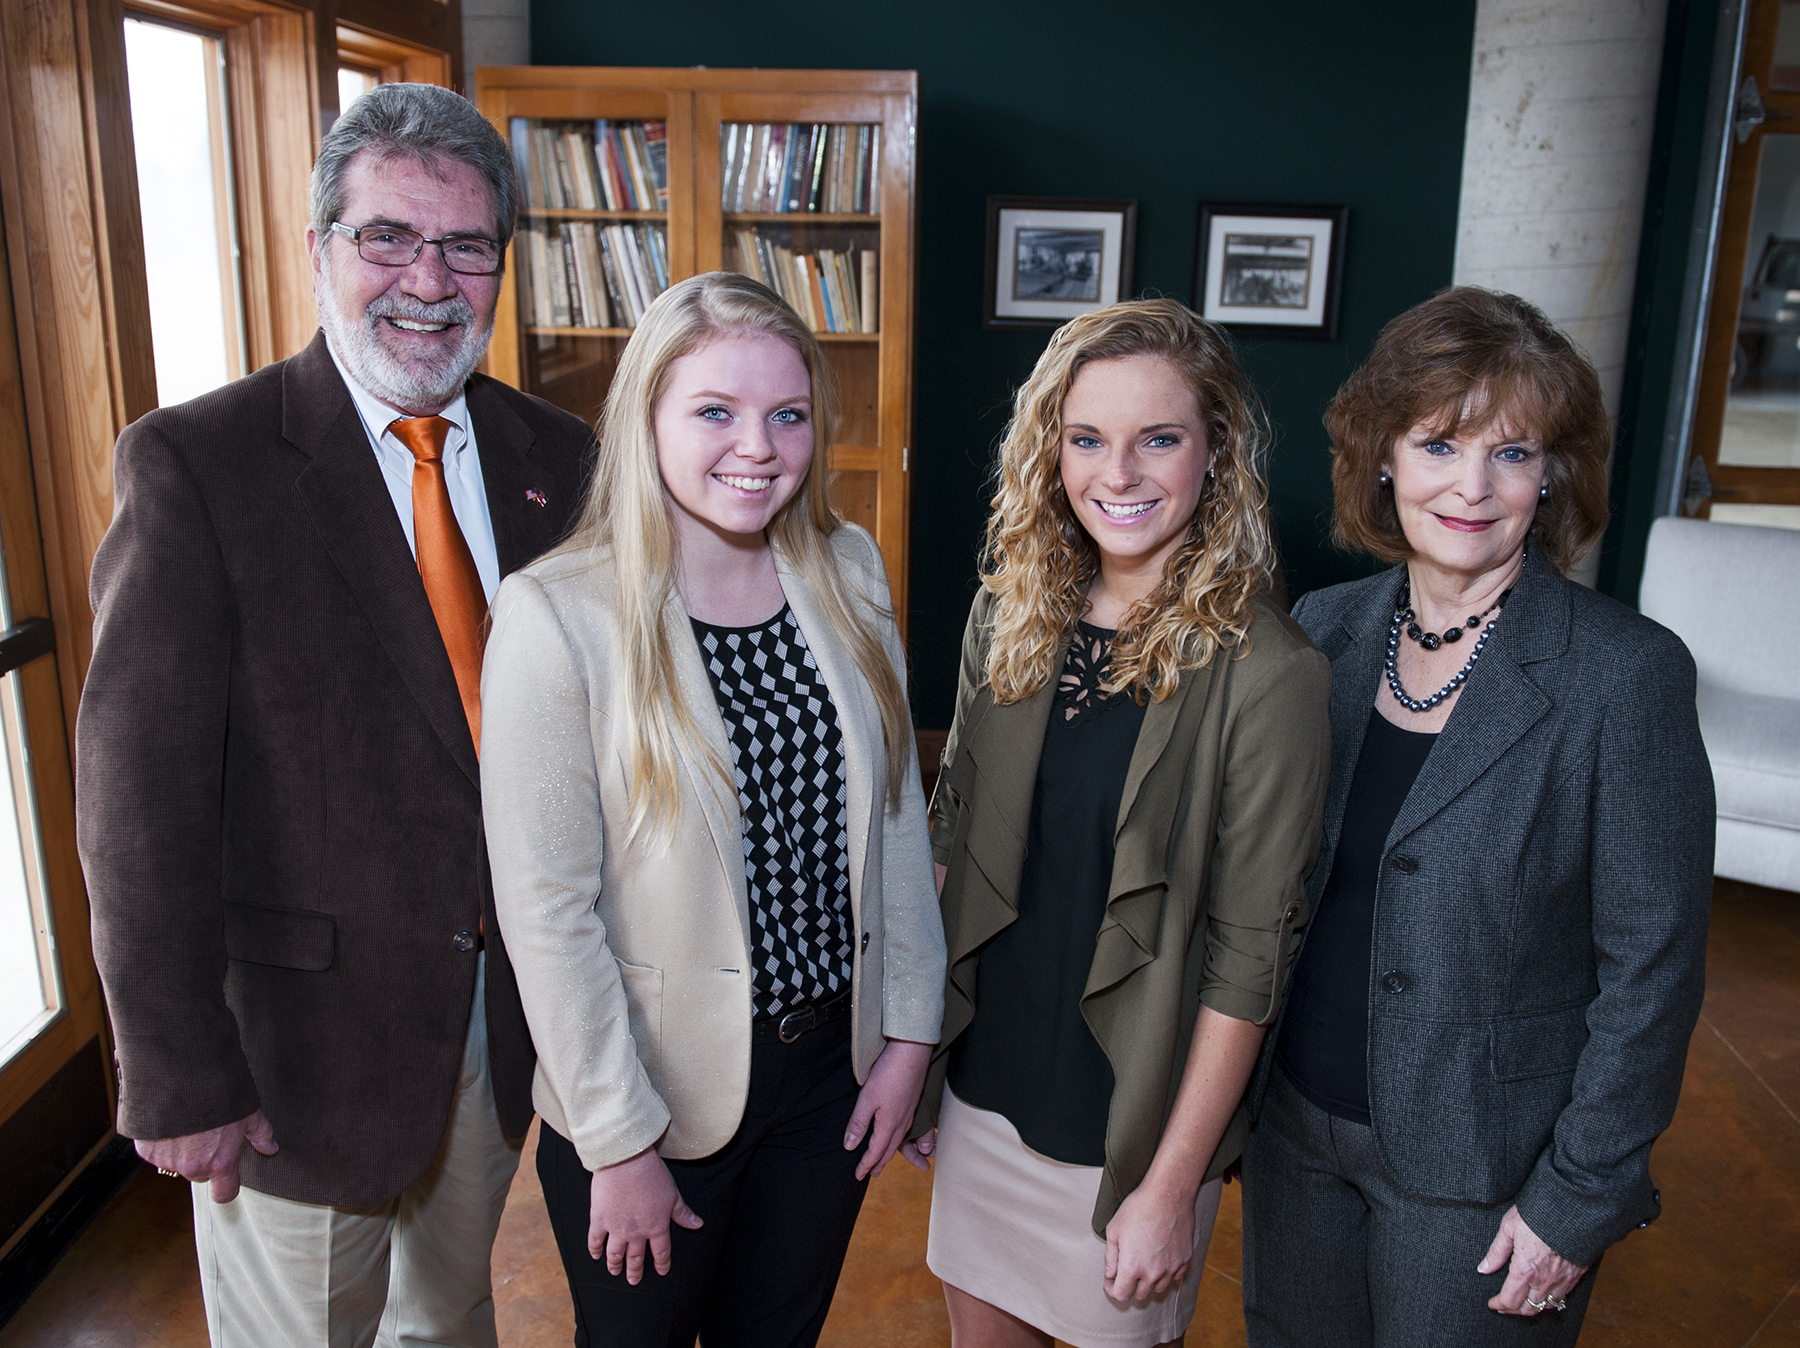 American Home Furnishings Alliance is awarding scholarships to two interior design majors studying at Mississippi State University. Junior Daniella R. Bower, center left, and sophomore Haley Austin, center right, will each receive $16,750. Congratulating them are directors Bill Martin, MSU Franklin Furniture Institute, and Beth Miller, MSU interior design.